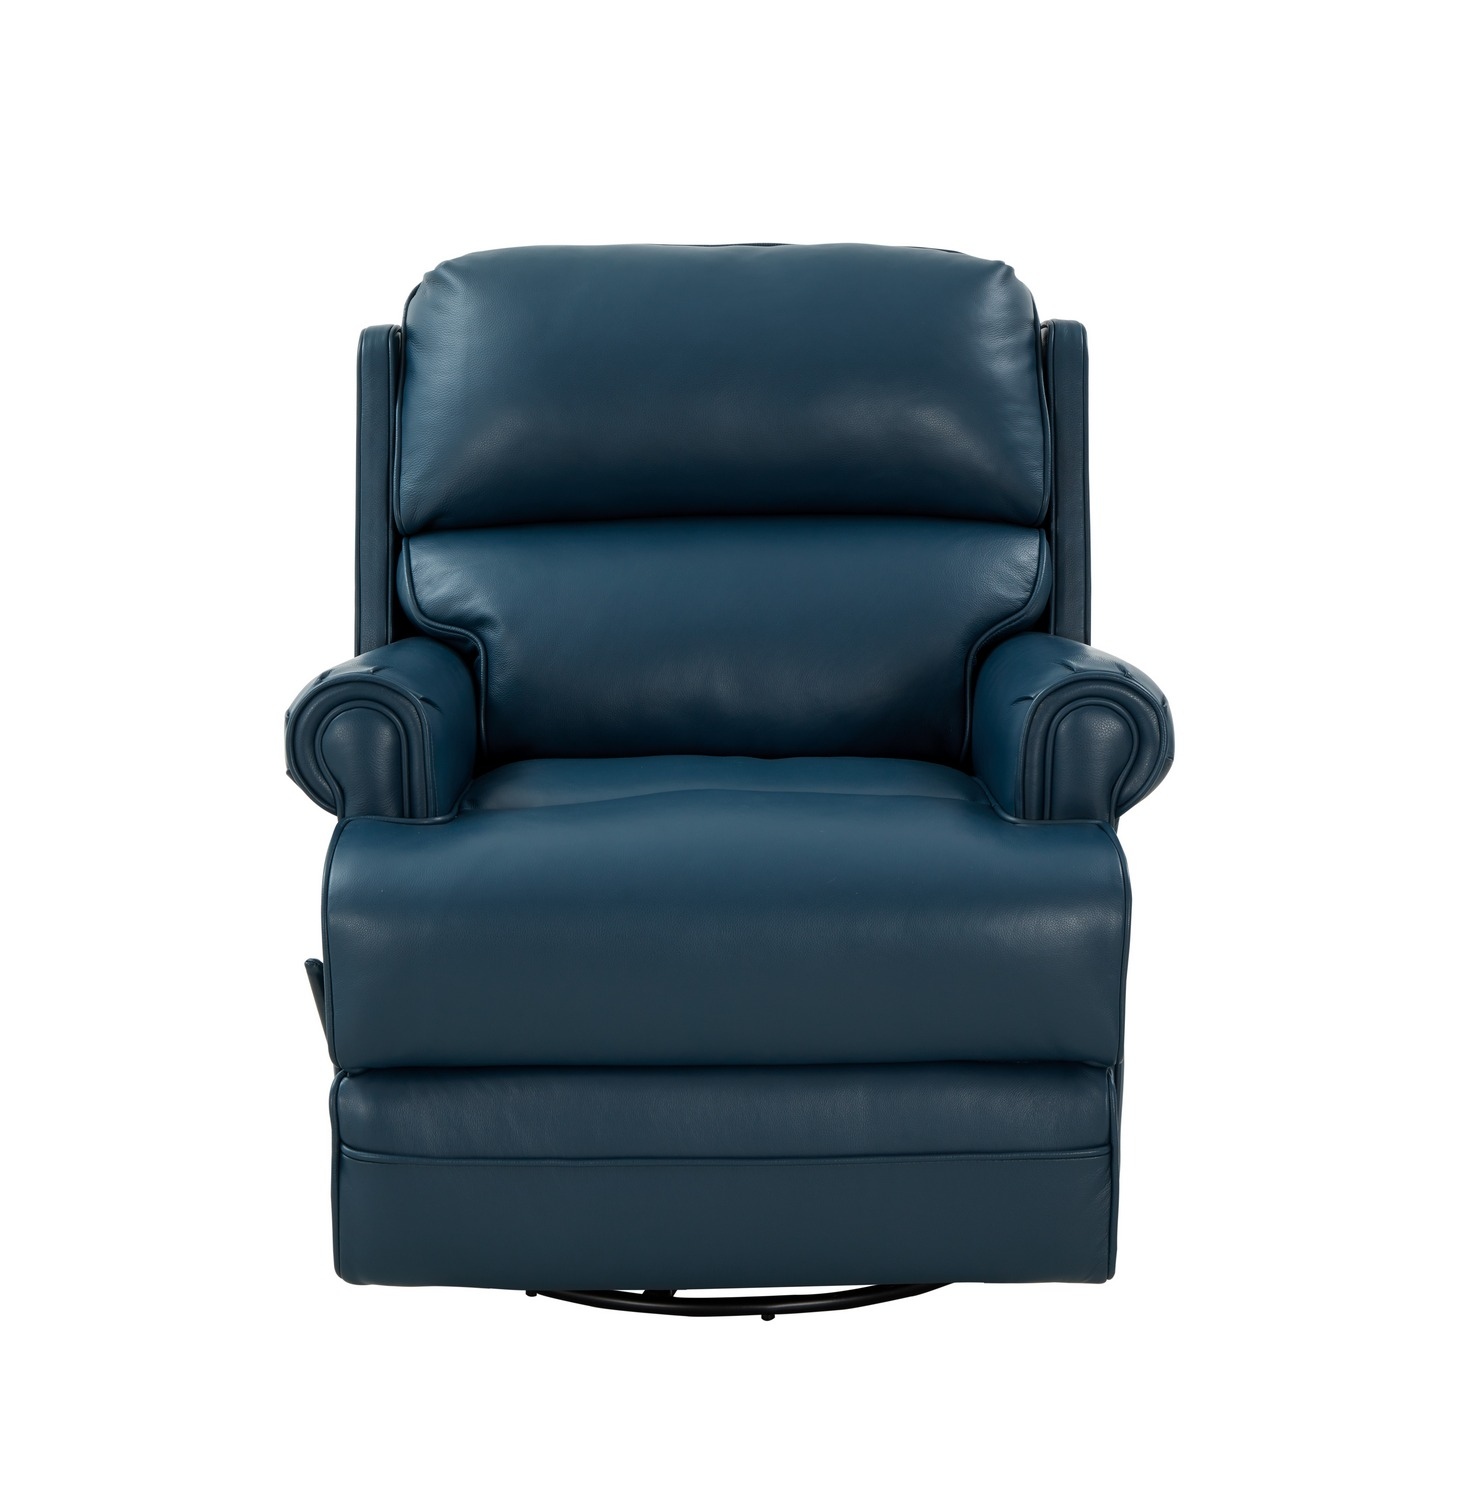 Barcalounger The Club Swivel Glider Recliner Chair - Prestin Yale Blue/All Leather